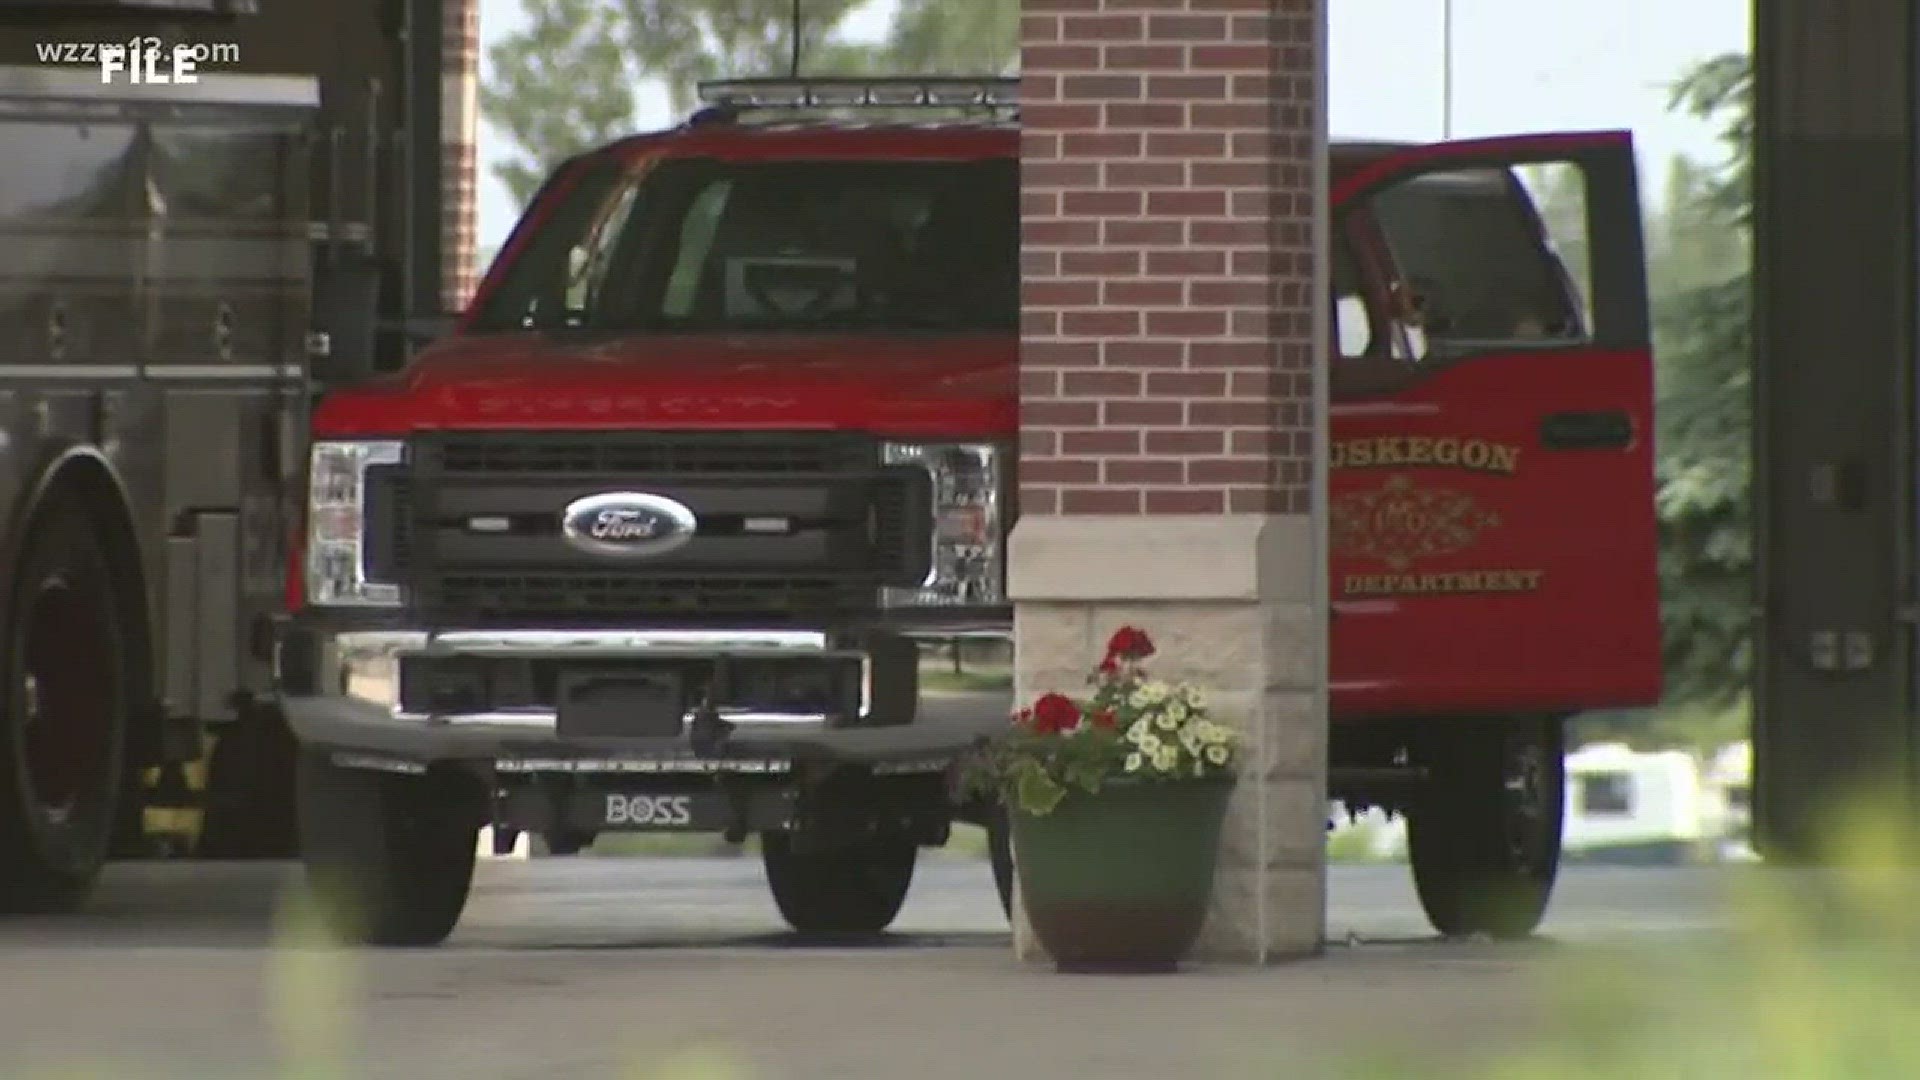 Muskegon considers outsourcing fire services